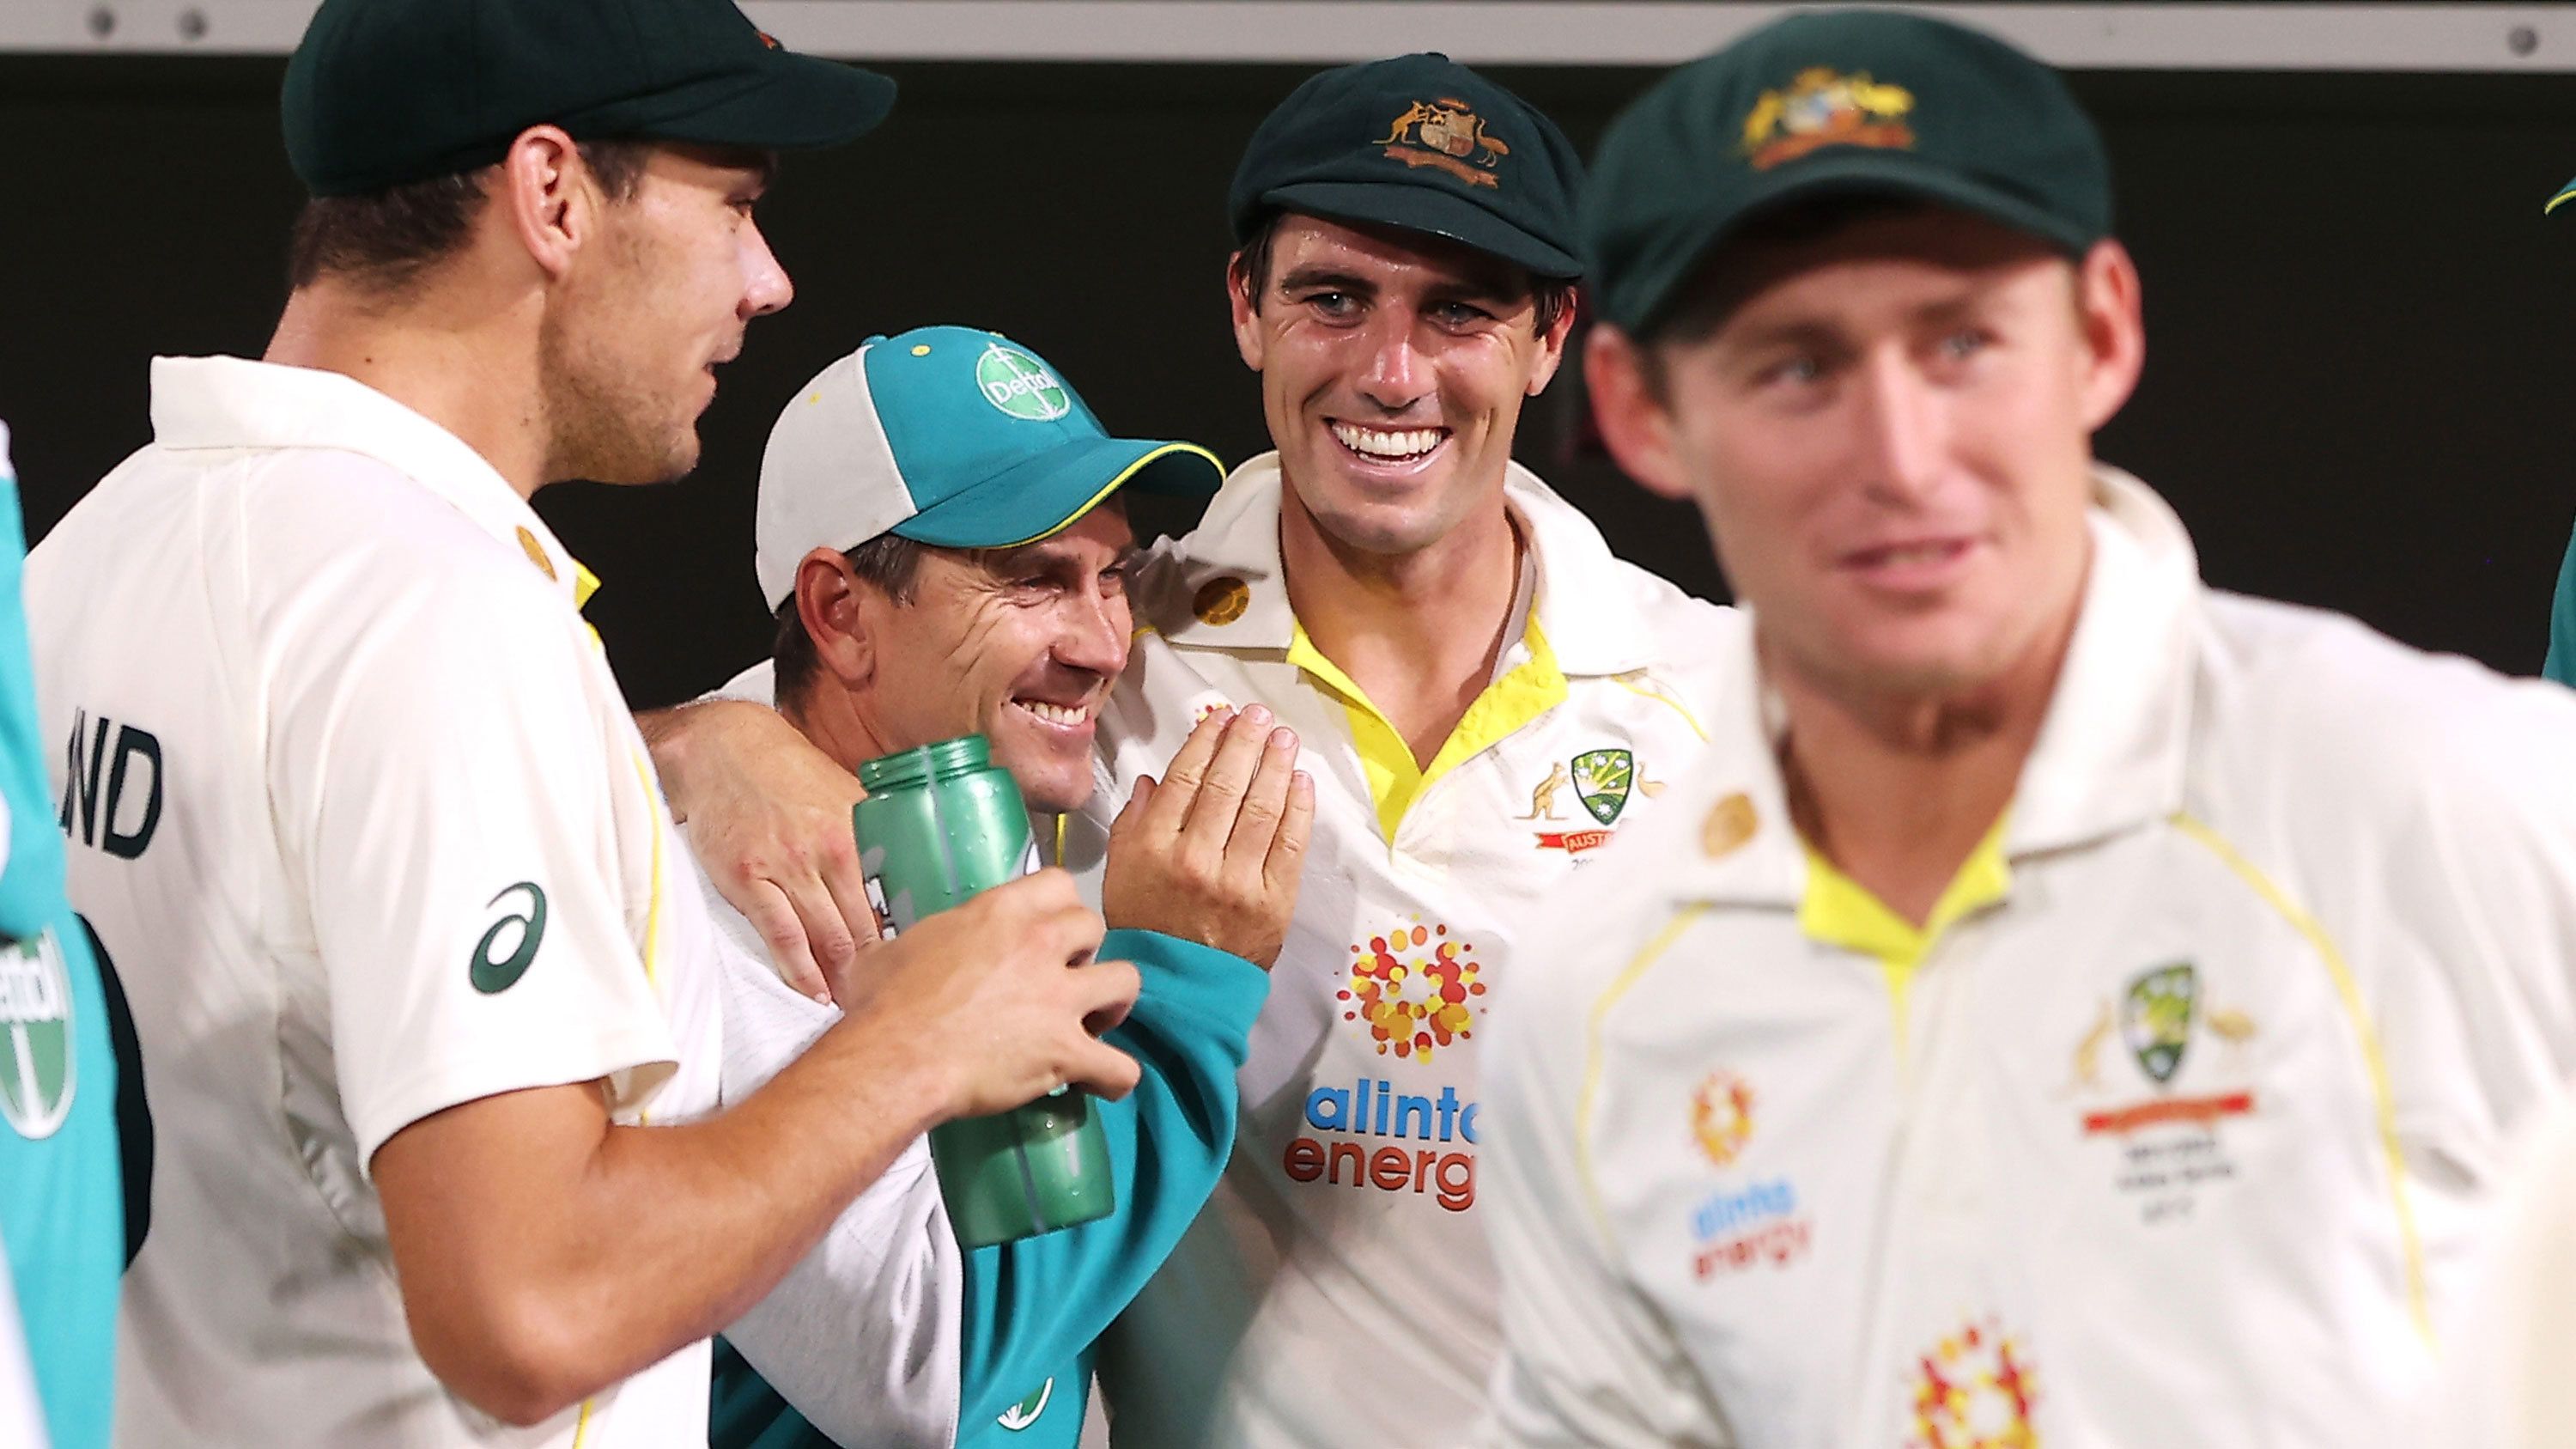 Then Australian coach Justin Langer and Australian captain Pat Cummins celebrate victory art the conclusion of the Ashes series.